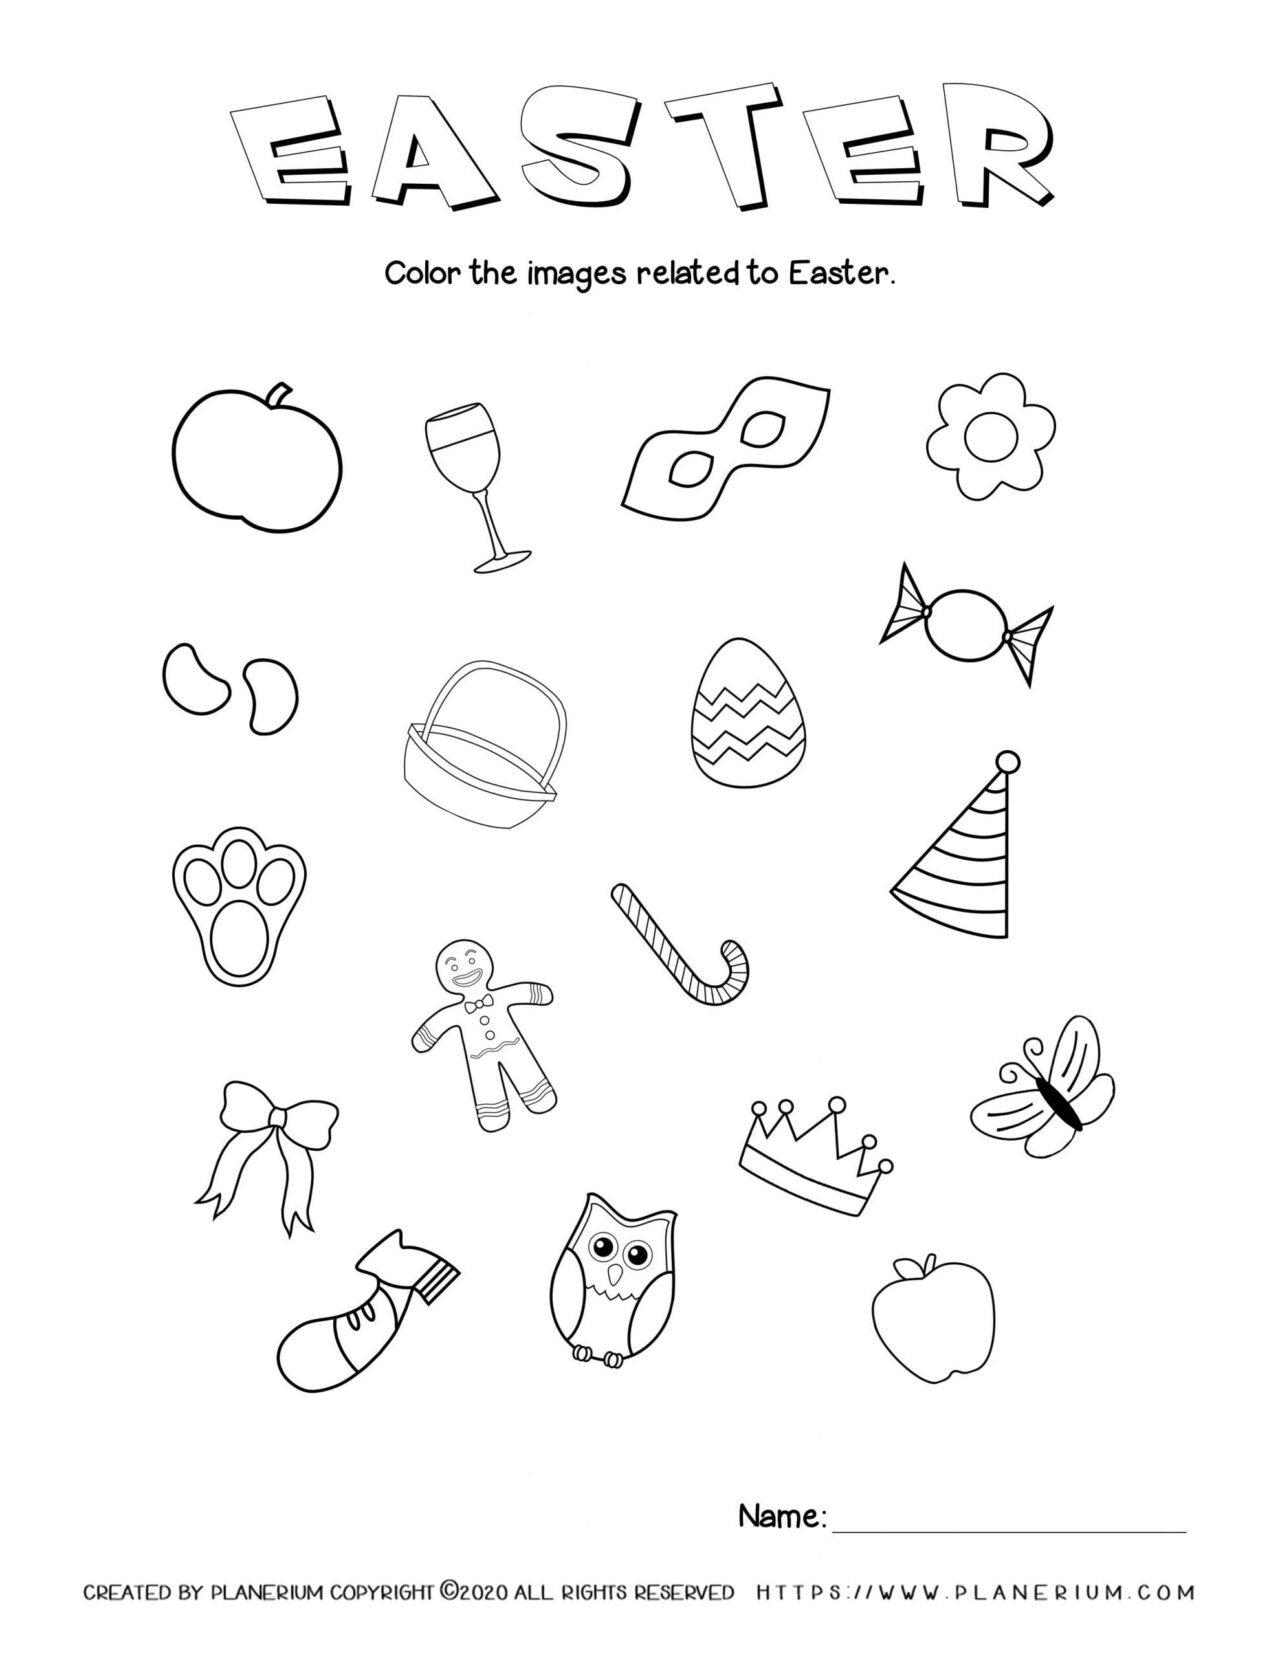 Easter related items worksheet